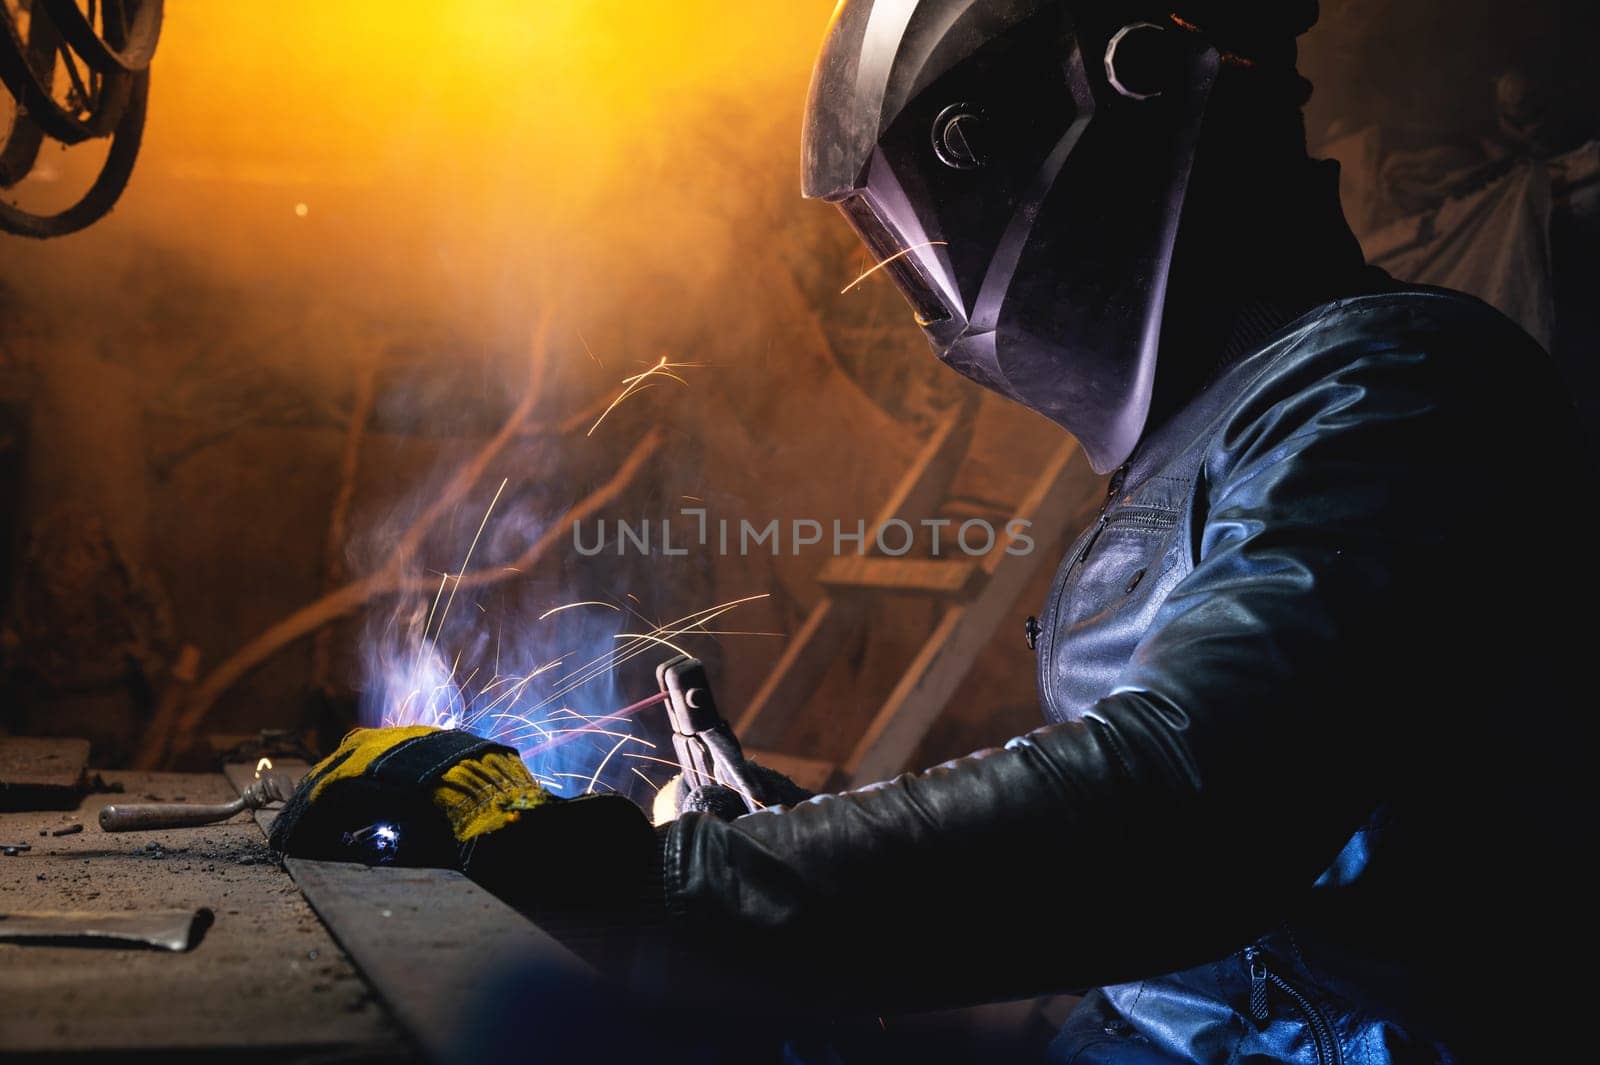 A male welder in a leather jacket carries out welding work in a home shed against the background of a brick wall. Handicraft production of metal structures and products.